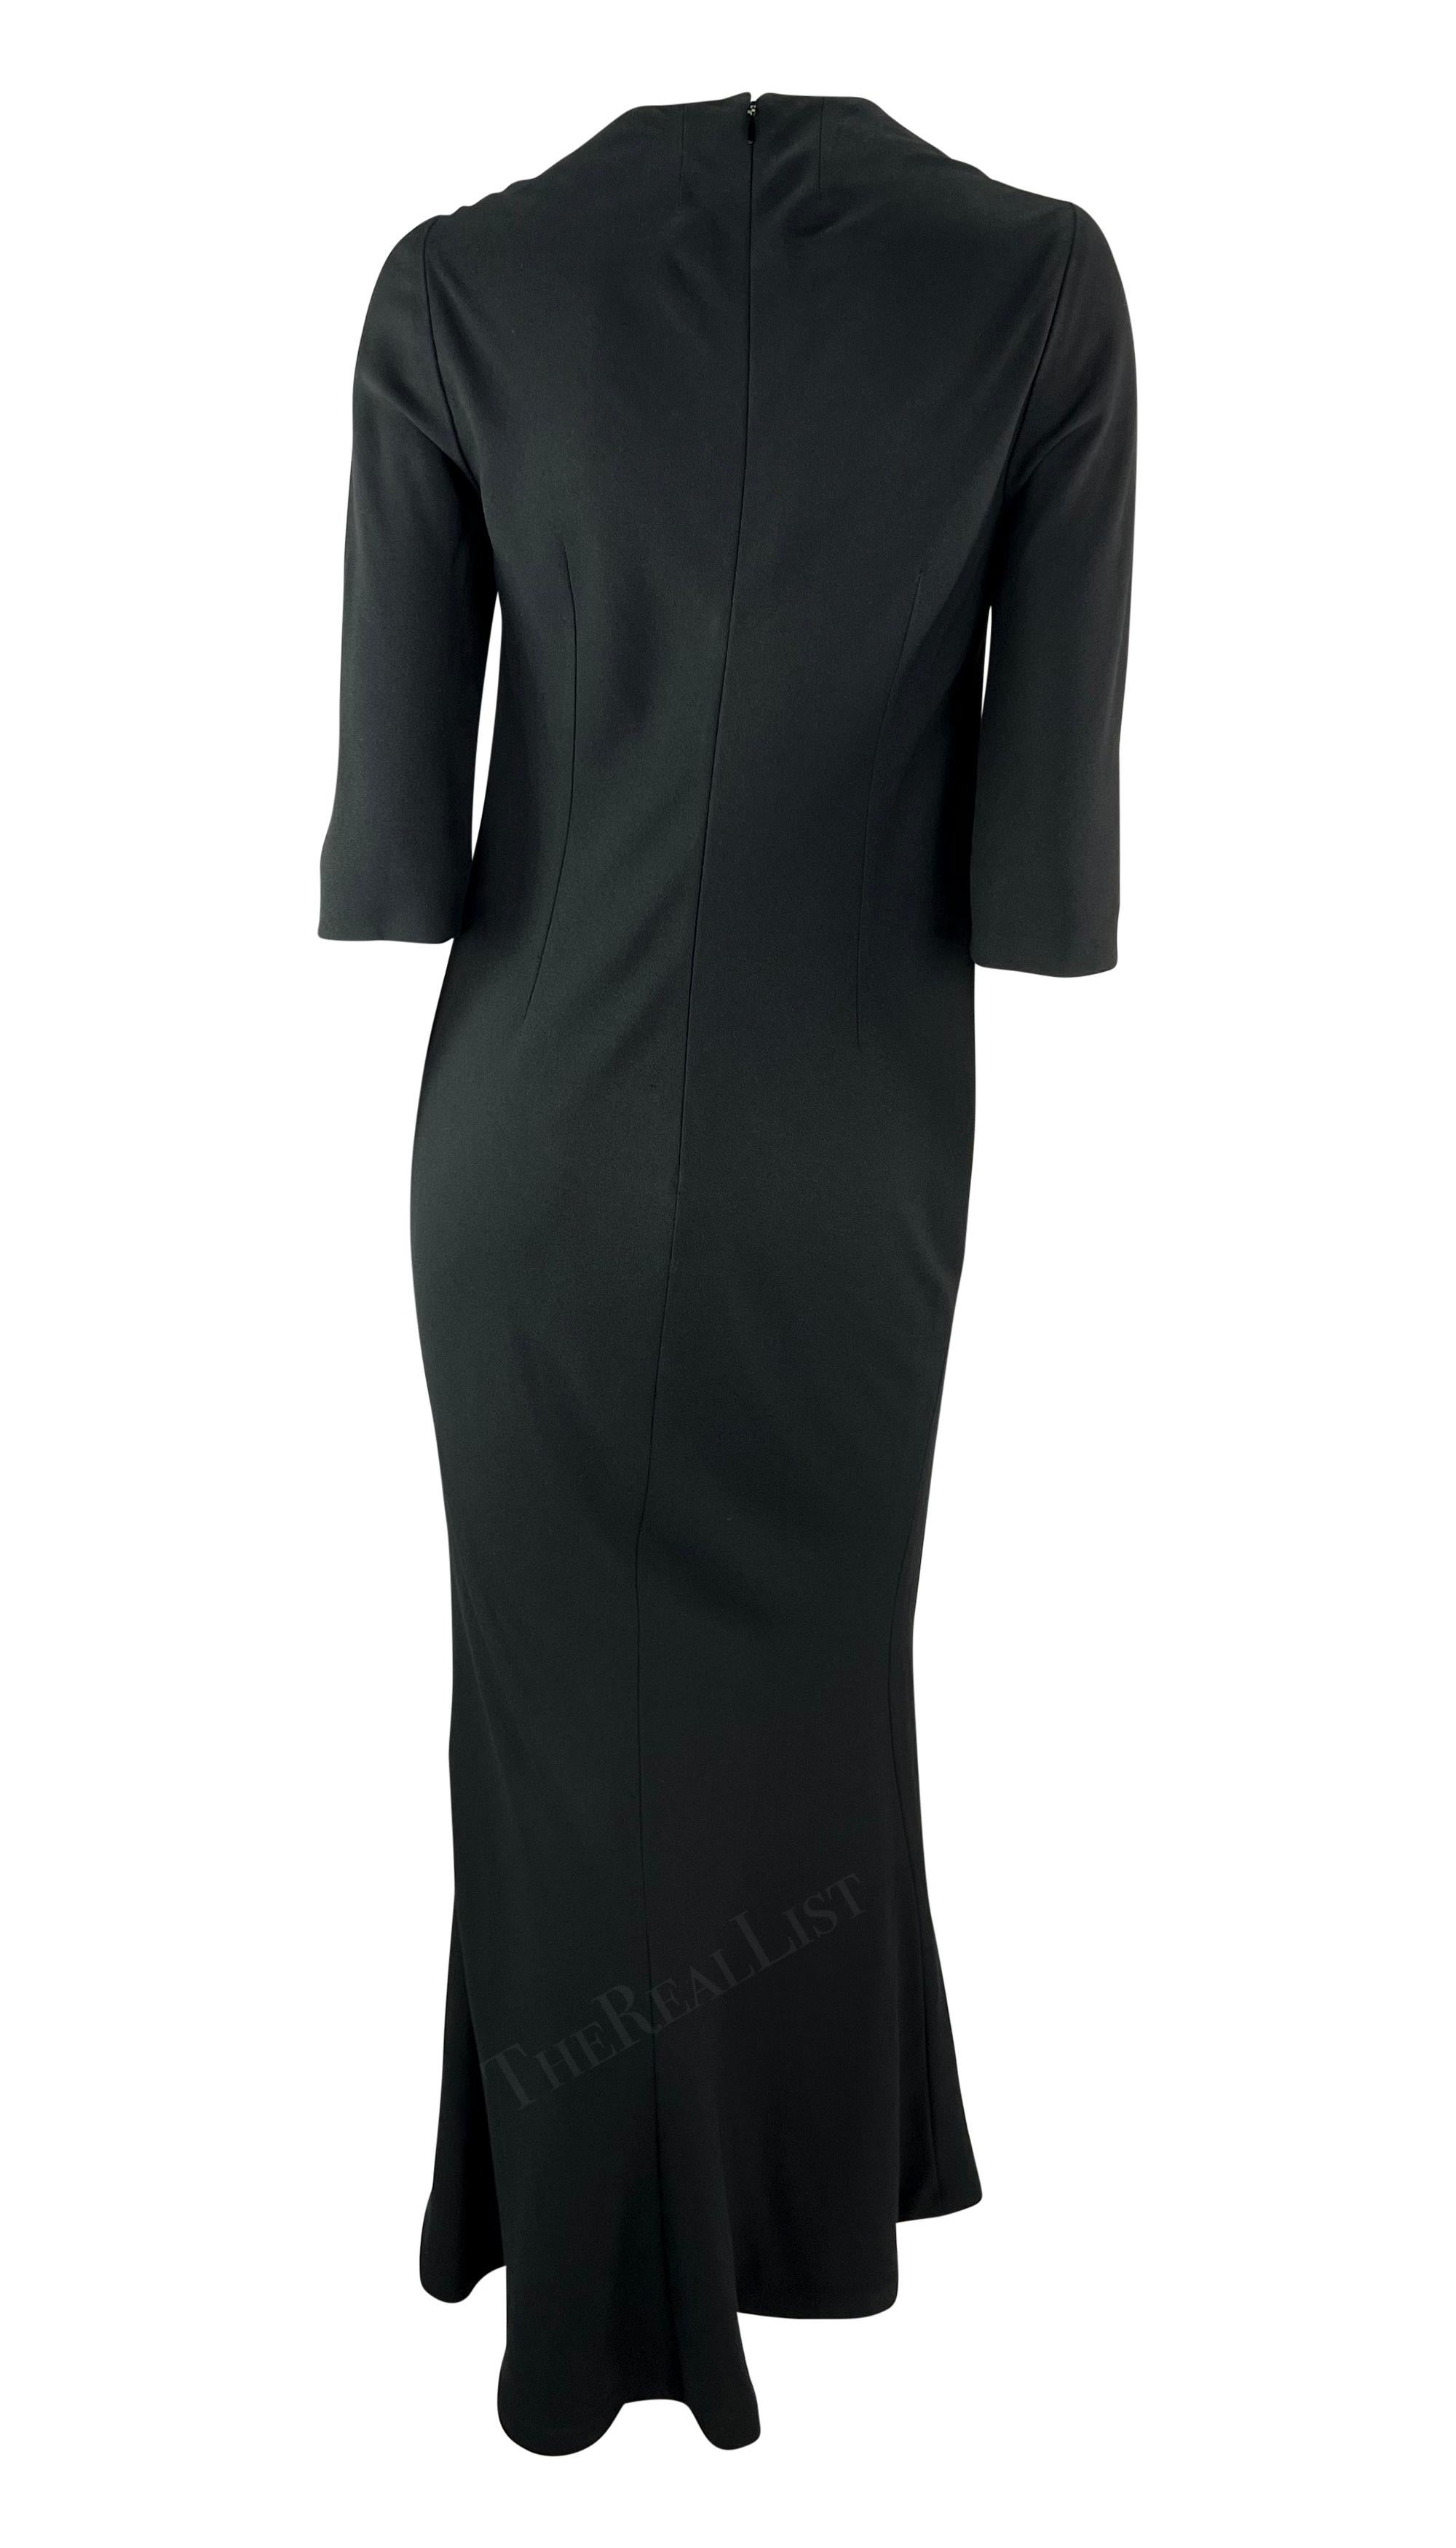 S/S 2006 Christian Dior Haute Couture by Galliano Gold Black Dress Jacket Set For Sale 7